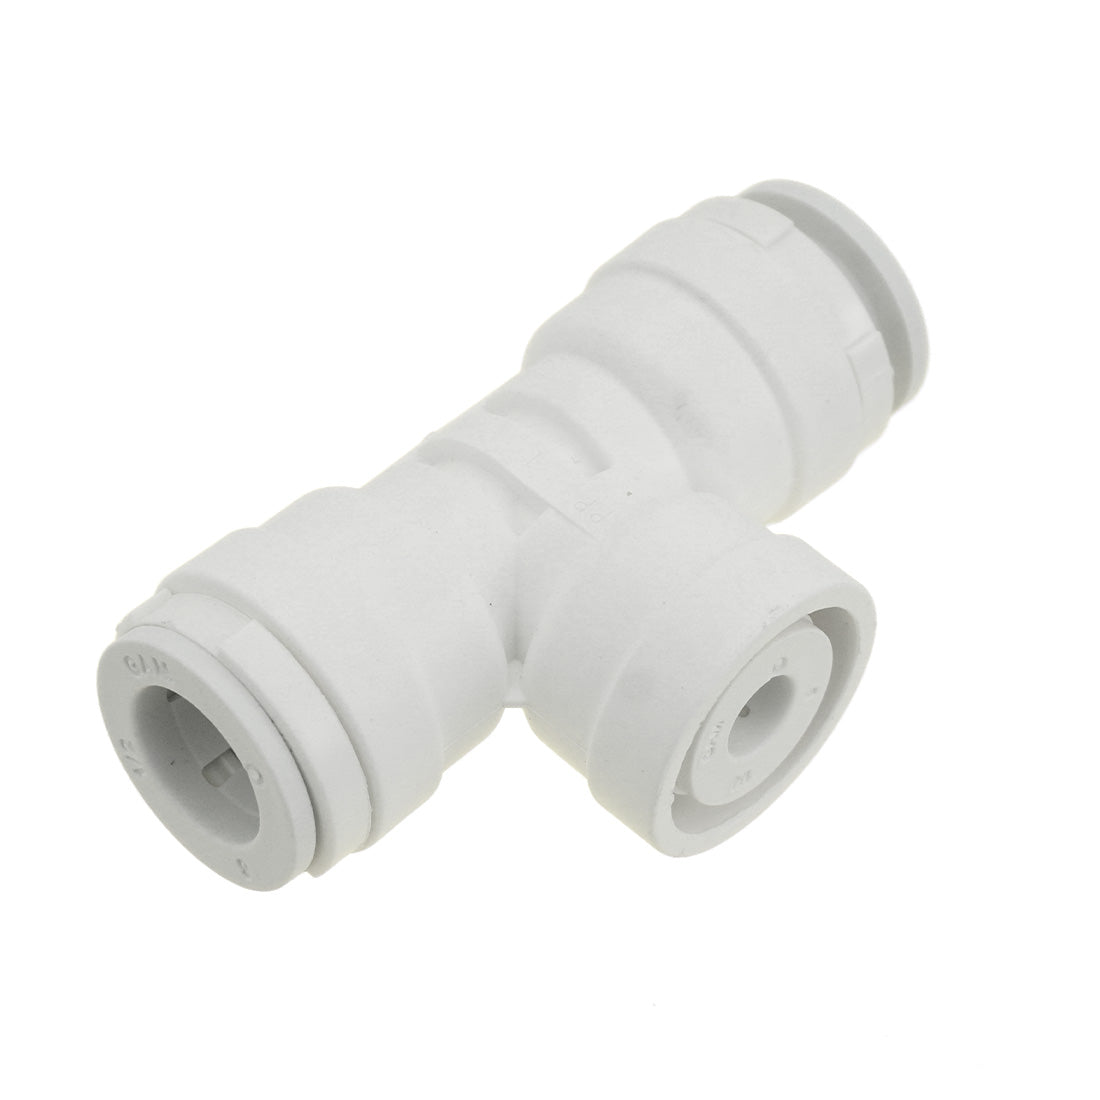 PWP Connector for TDS Meter Probes 1/2 Tube Size Left Angle View